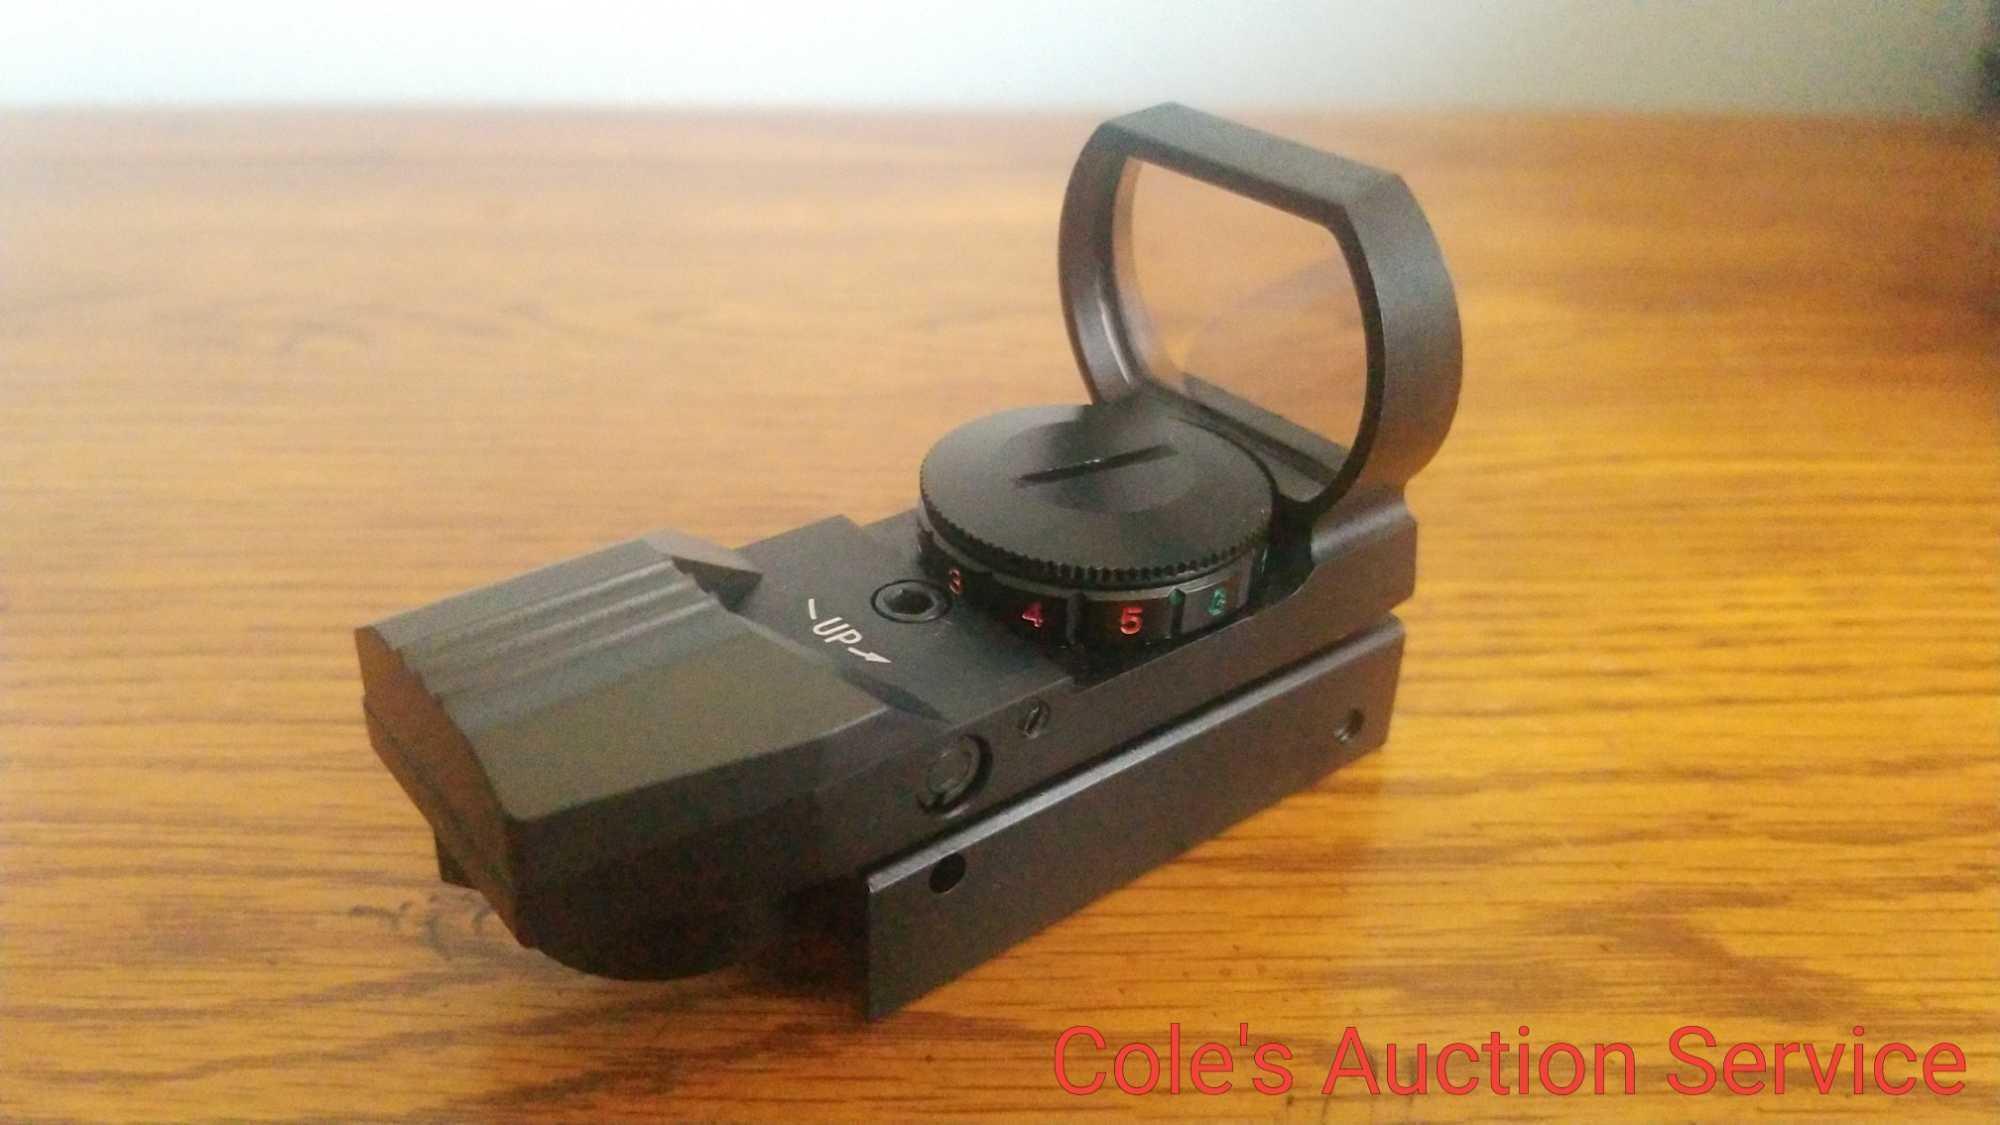 Carbon Express multi reticle red Dot sight. New in box. features for radical designs, 10 brightness